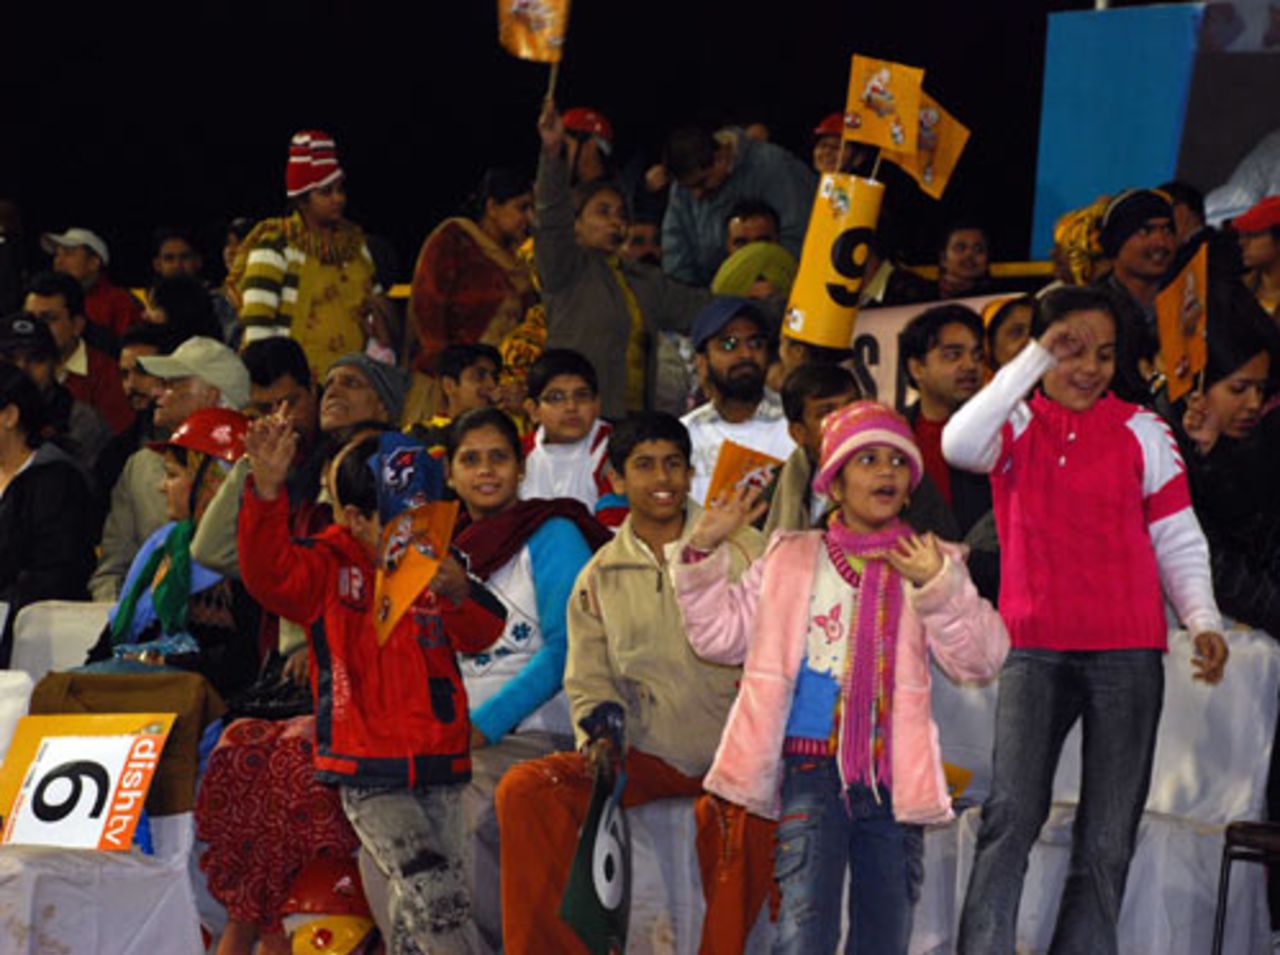 A festive crowd turned up for the match, Hyderabad Heroes v Mumbai Champs, Indian Cricket League, Panchkula, December 15, 2007